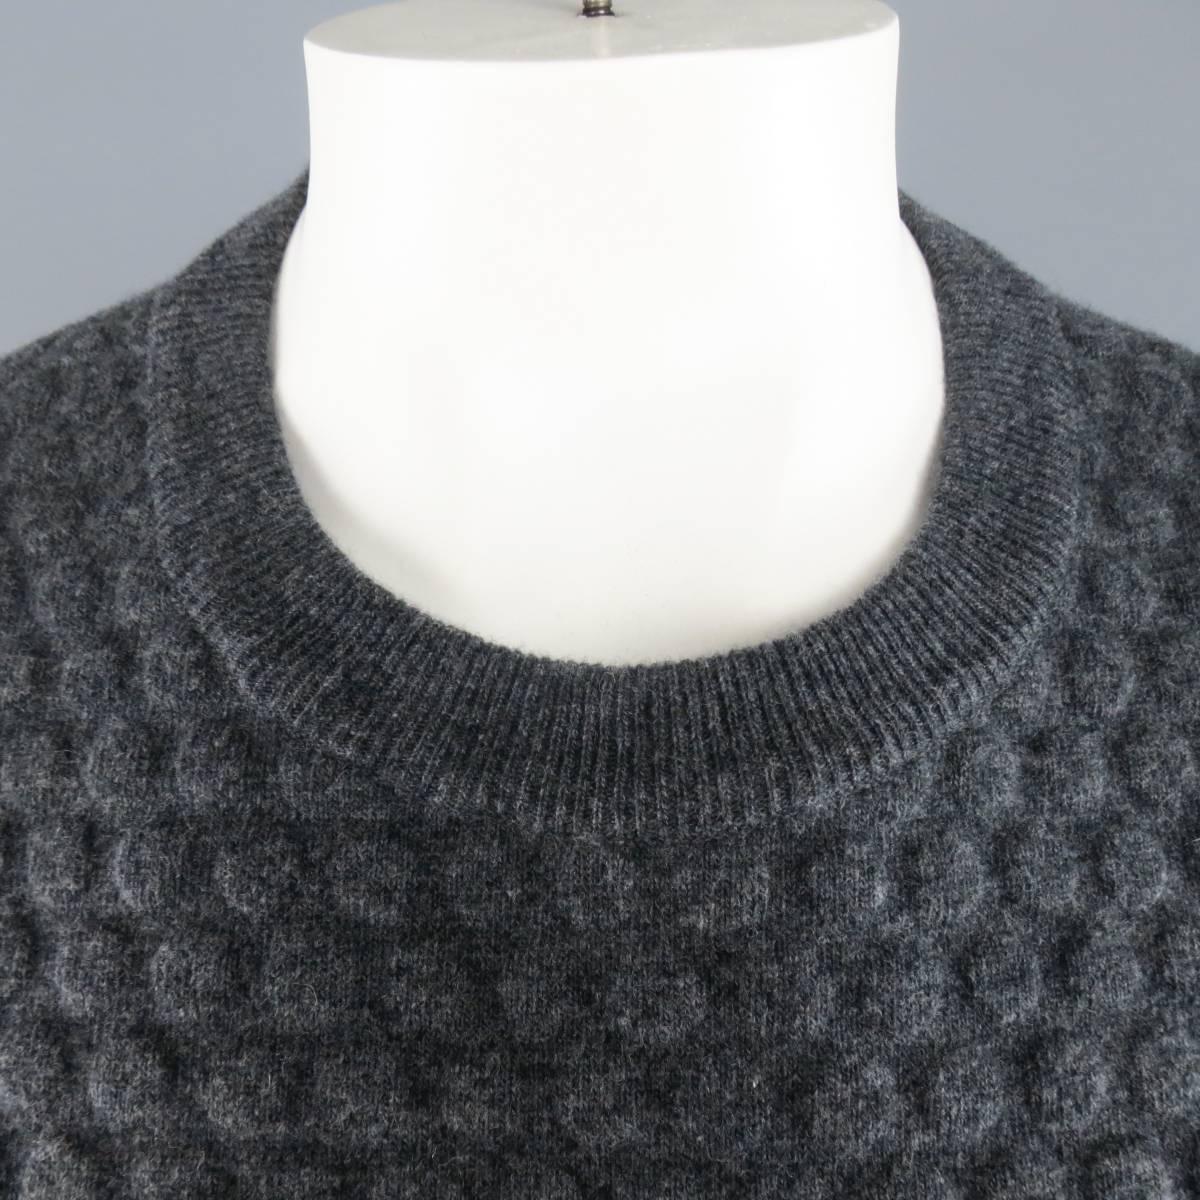 JIL SANDER crewneck pullover in a dark heather gray wool cashmere blend featuring a 3D embossed polka dot pattern neoprene bonded front. Made in Italy.
 
New with Tags.
Marked: IT 52
 
Measurements:
 
Shoulder: 20 in.
Chest: 48 in.
Sleeve: 28